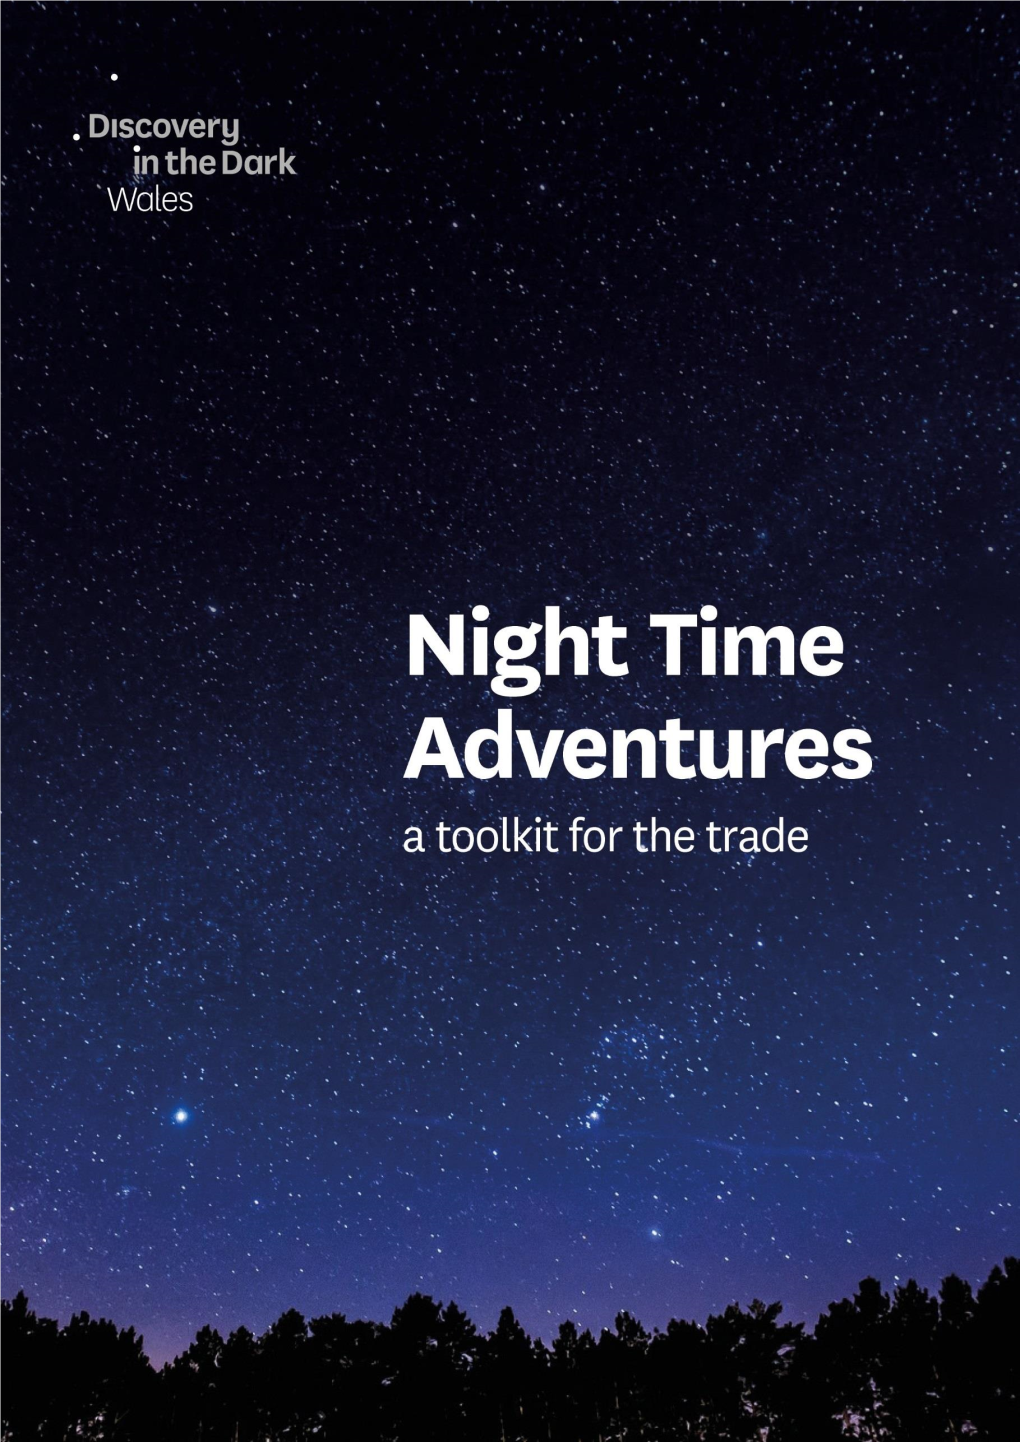 A Toolkit for the Trade (Pdf)